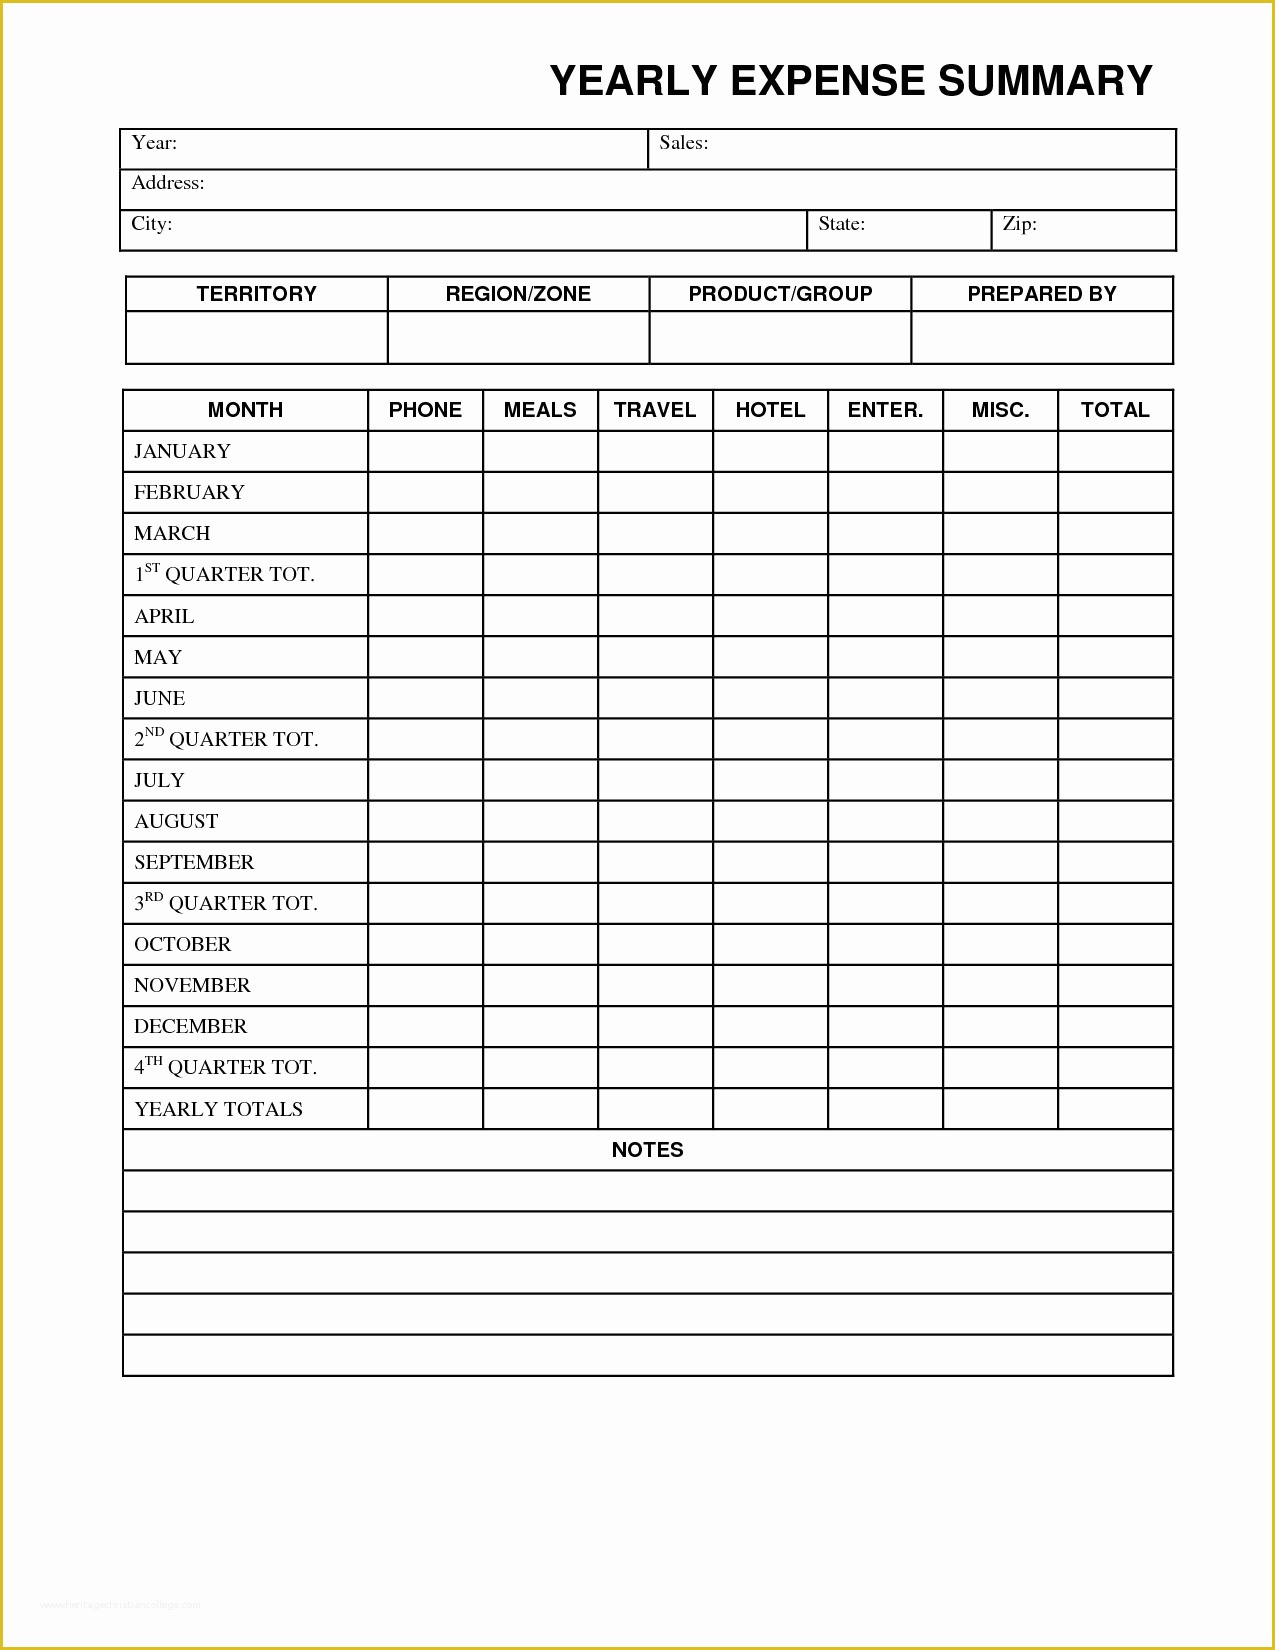 Business Expense Report Template Free Of Blank Annual Yearly Business Expense Report Template